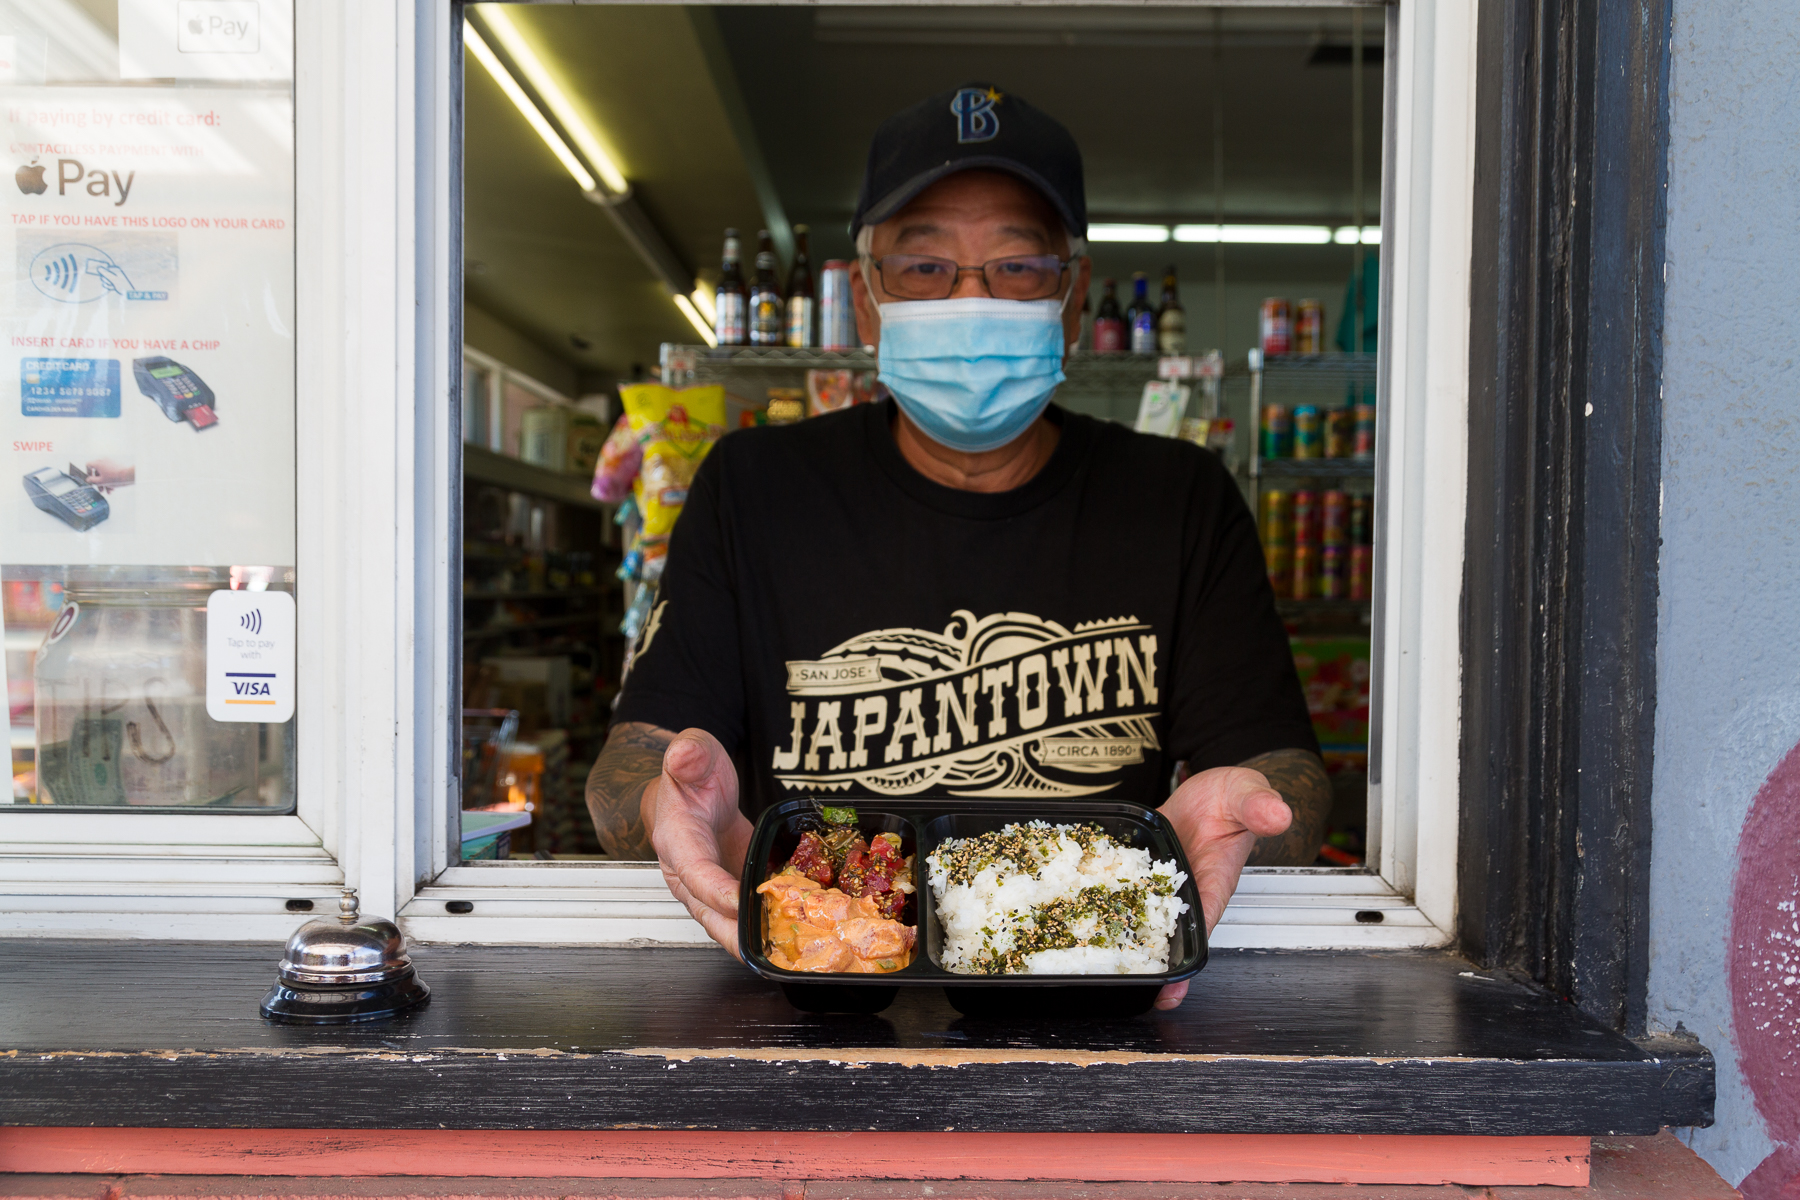 A man in a "Japantown" shirt holds out a tray of poke from the window of a Japanese market.